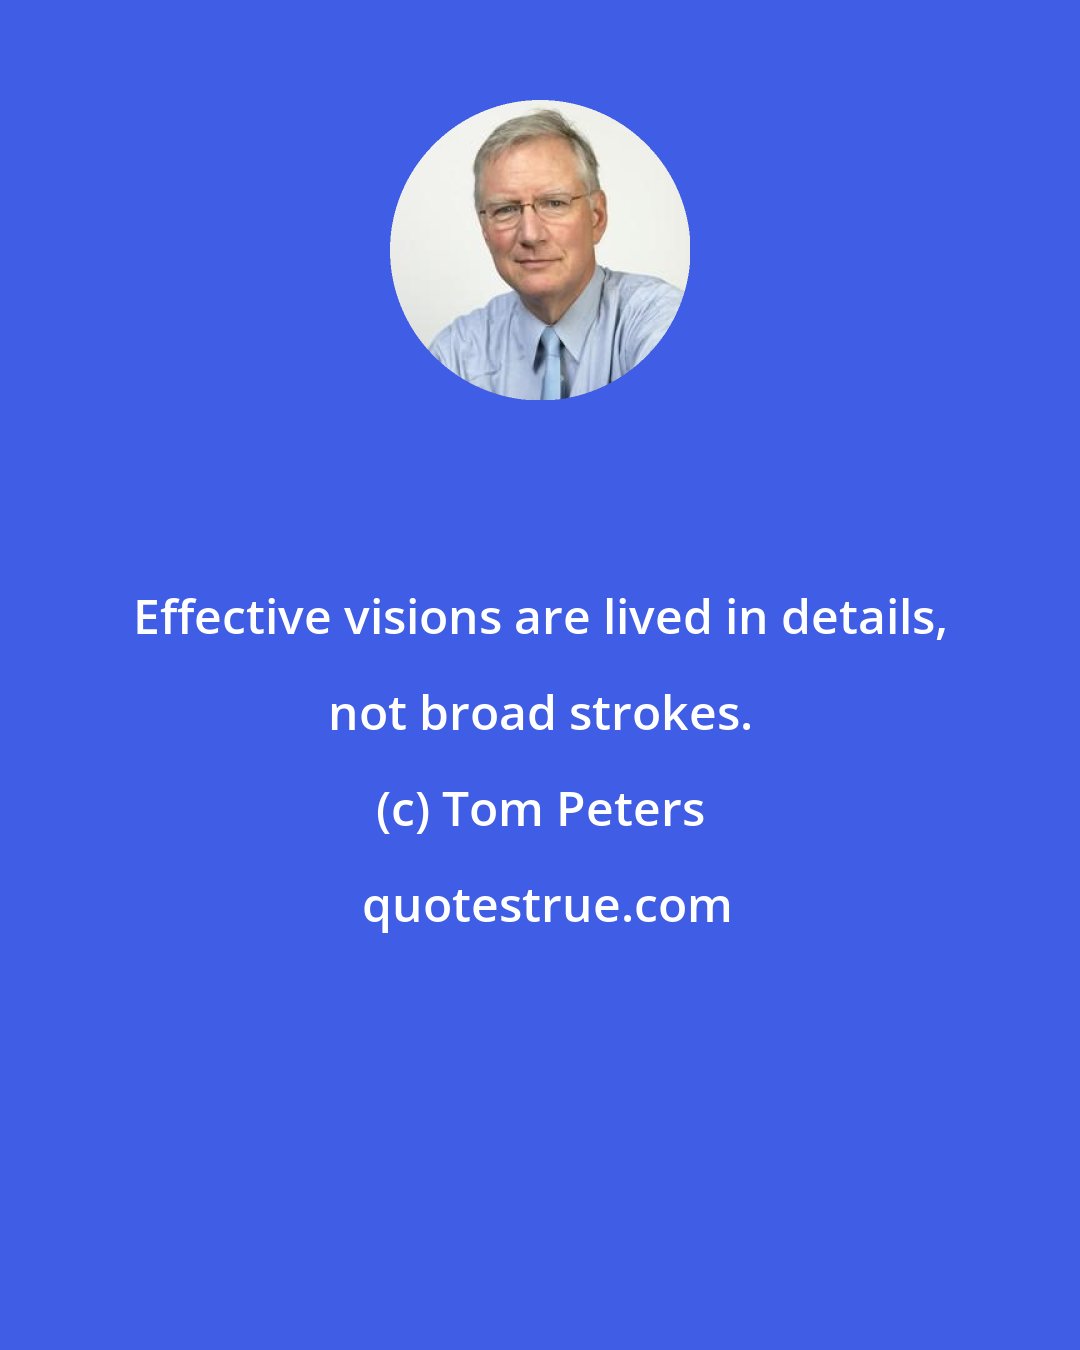 Tom Peters: Effective visions are lived in details, not broad strokes.